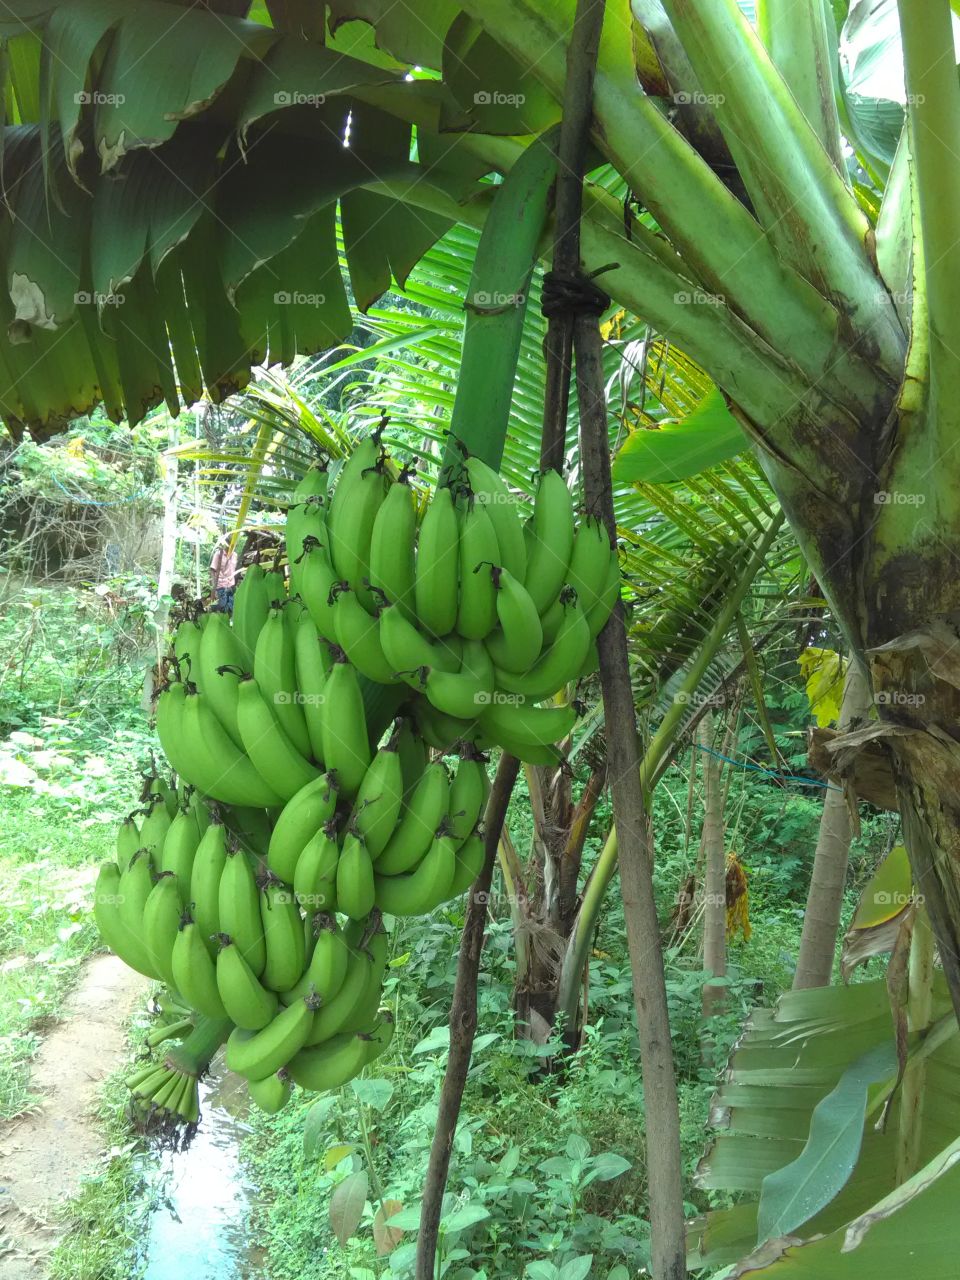 This is a very beautiful dugen of banana's froute.